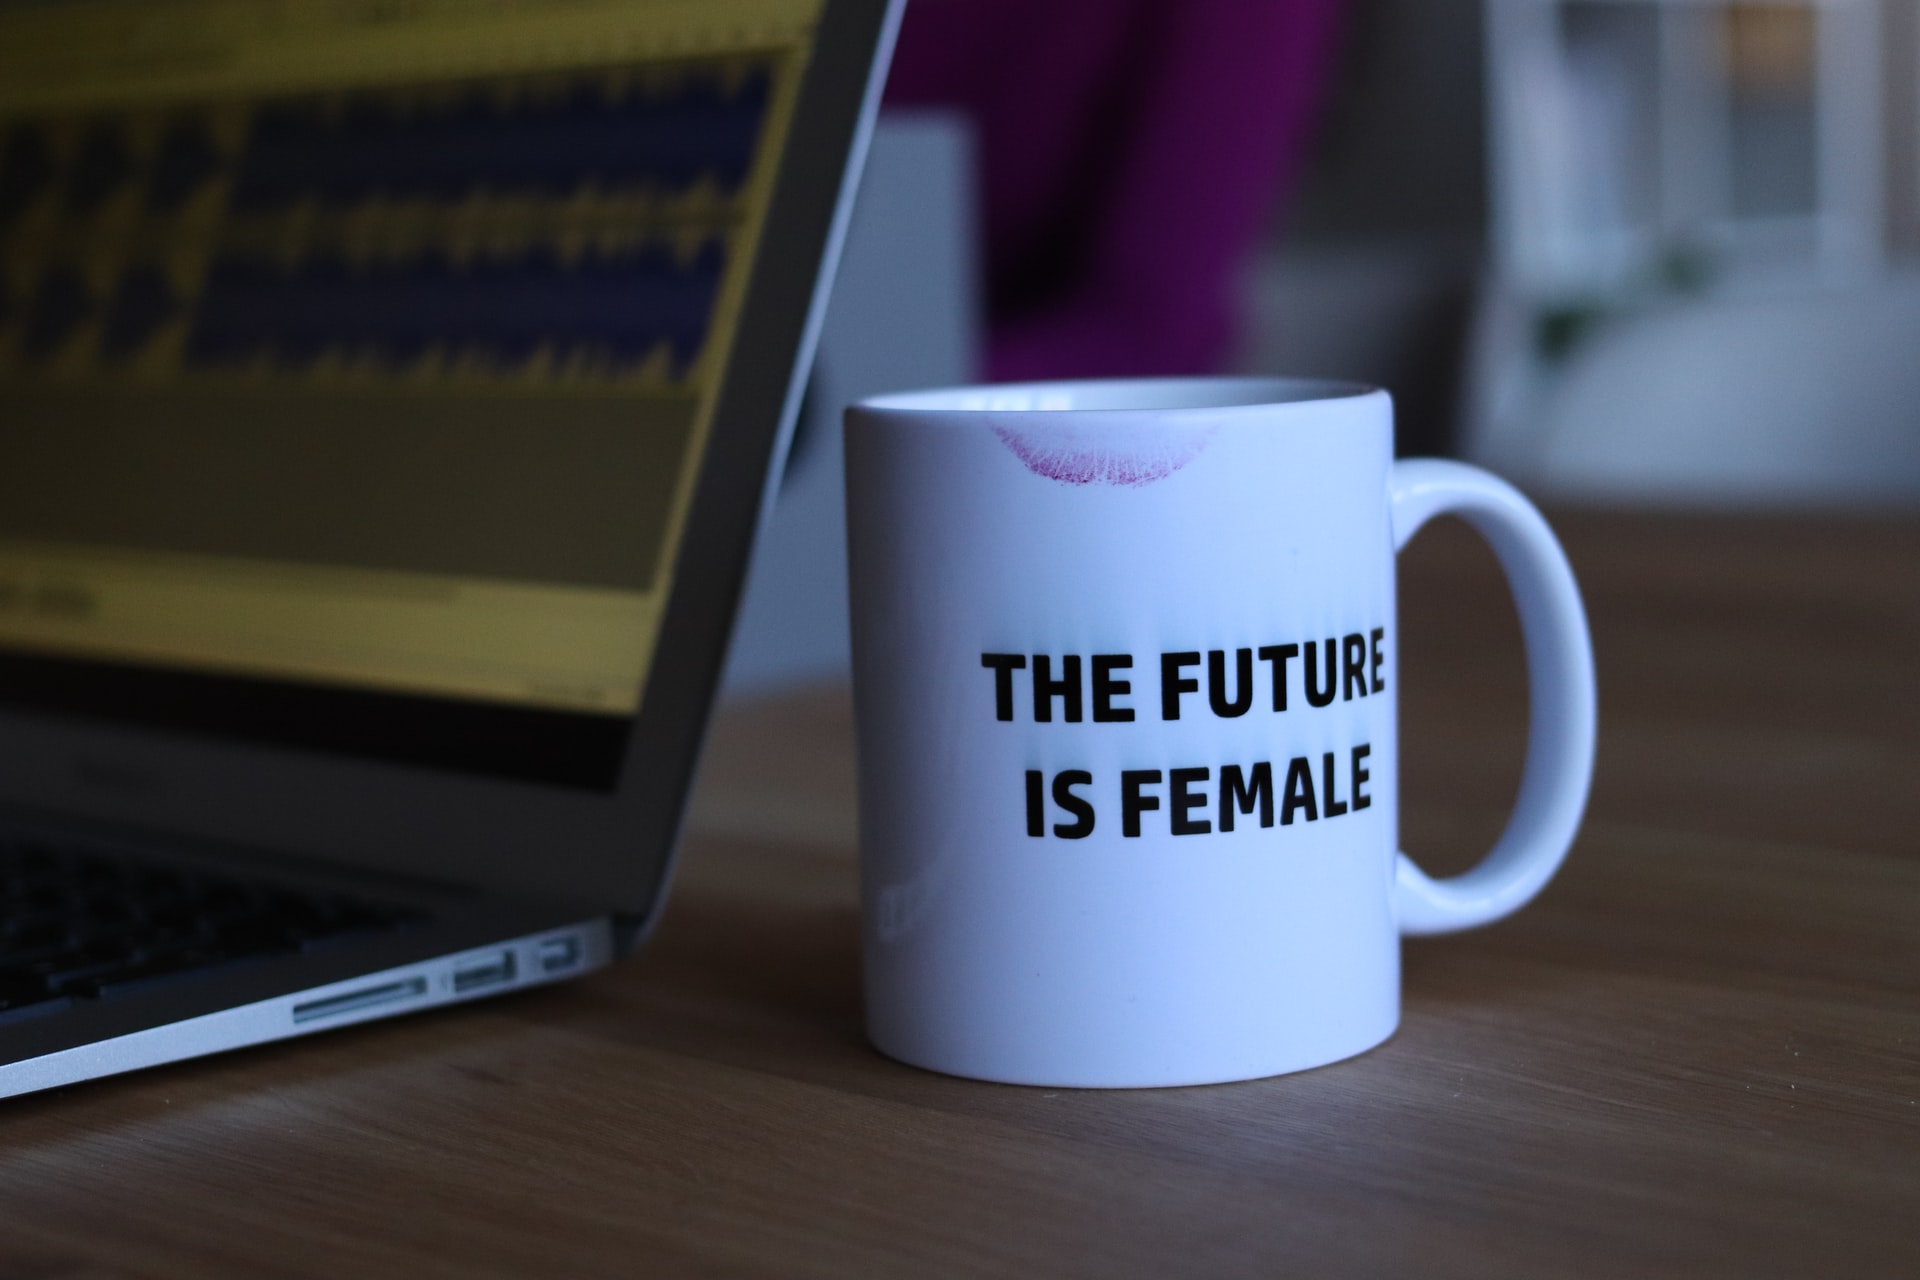  The Future is Female: Empowering African women-led startups